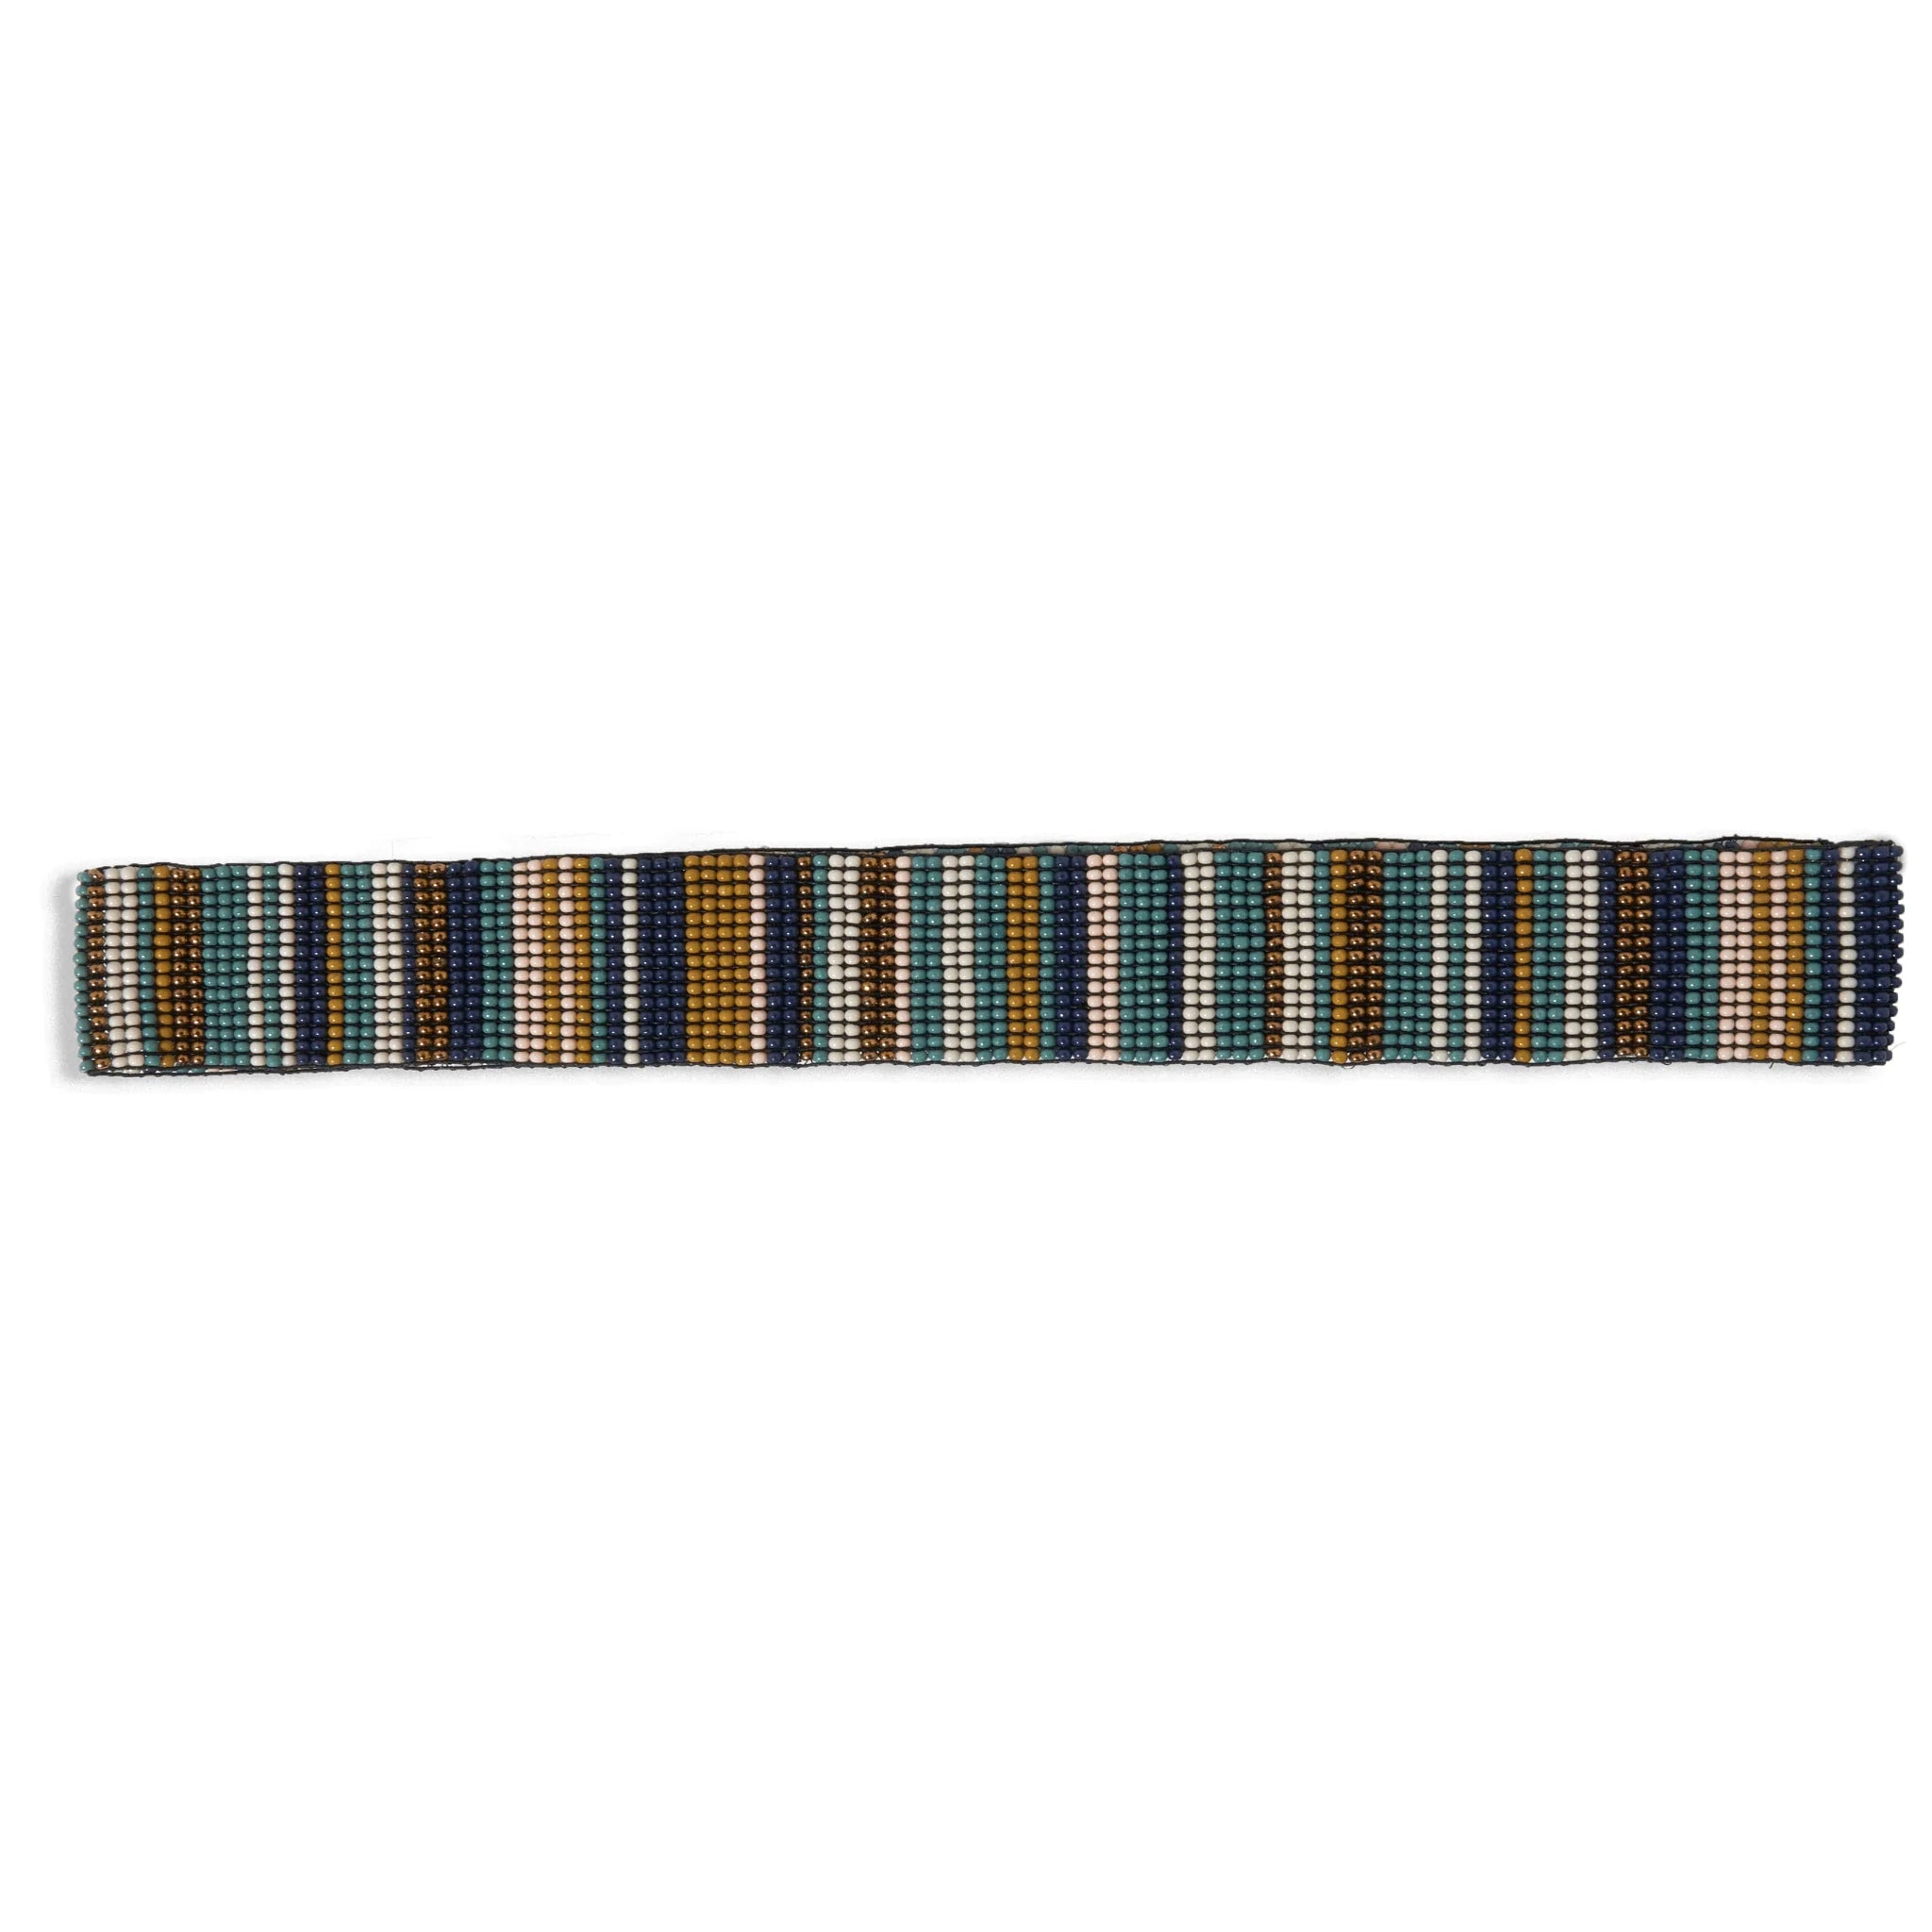 Teal Navy Stripe Seed Bead Hat Band